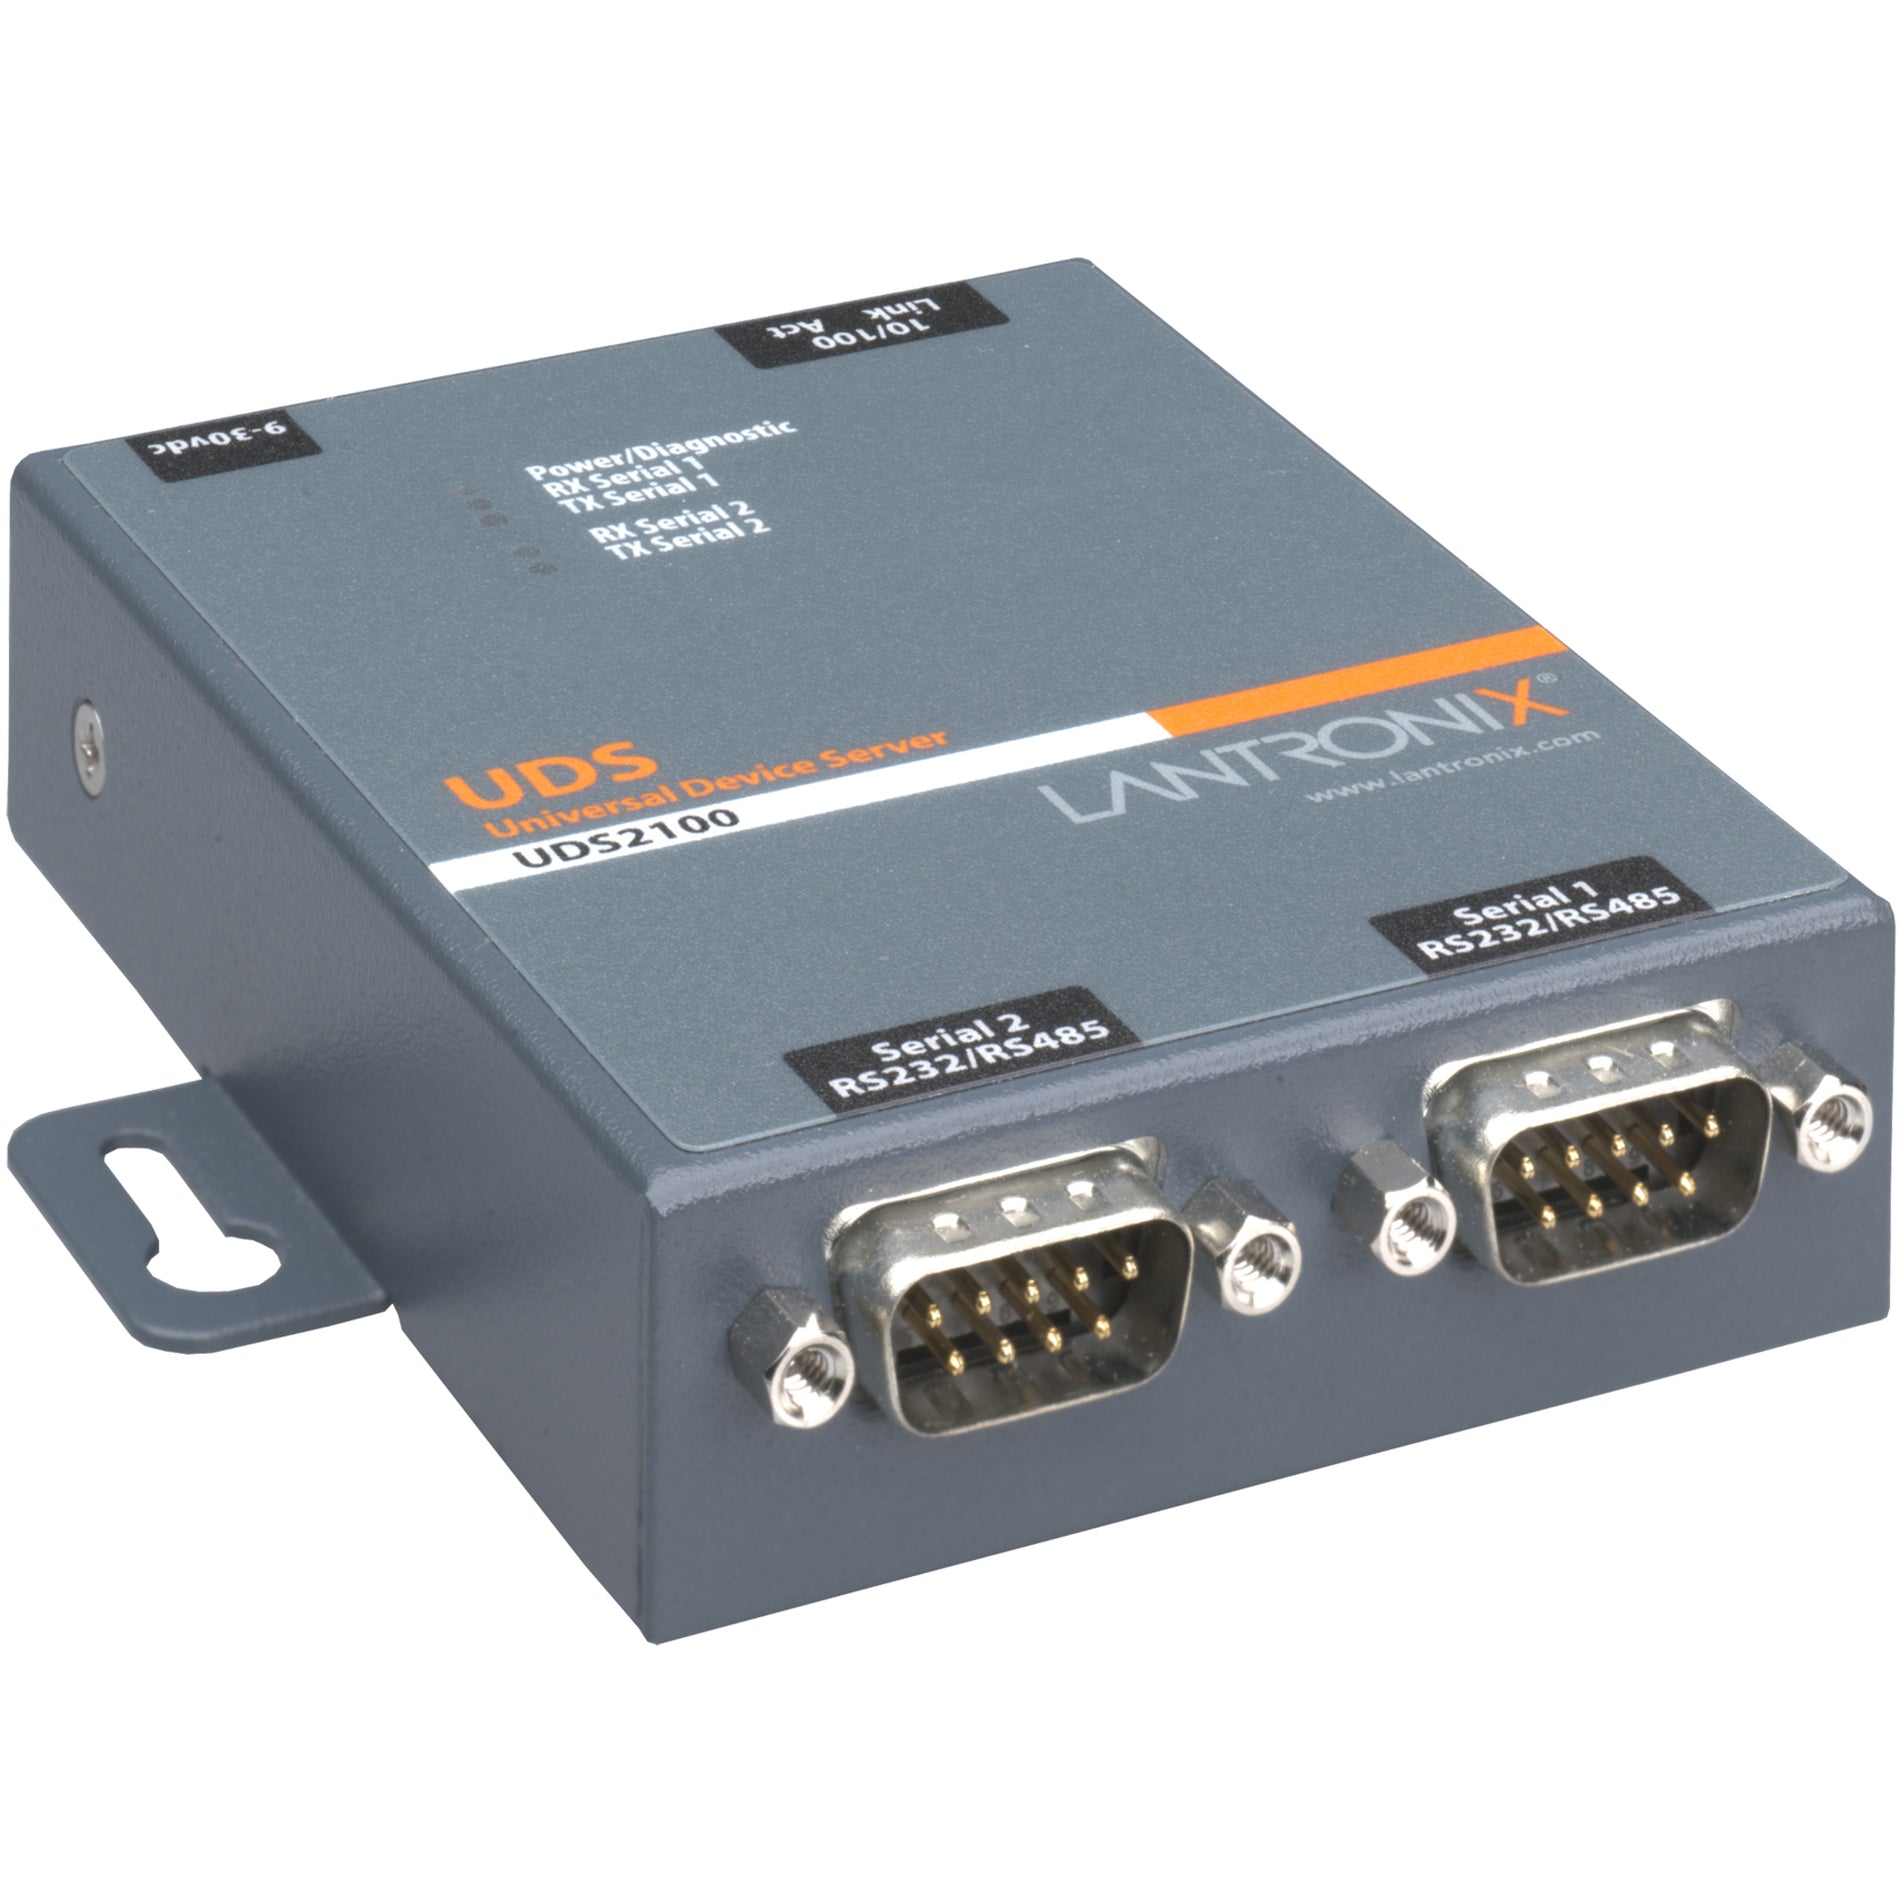 Lantronix UD2100001-01 UDS2100 2-Port Device Server, Supporting RS232, RS422 and RS485